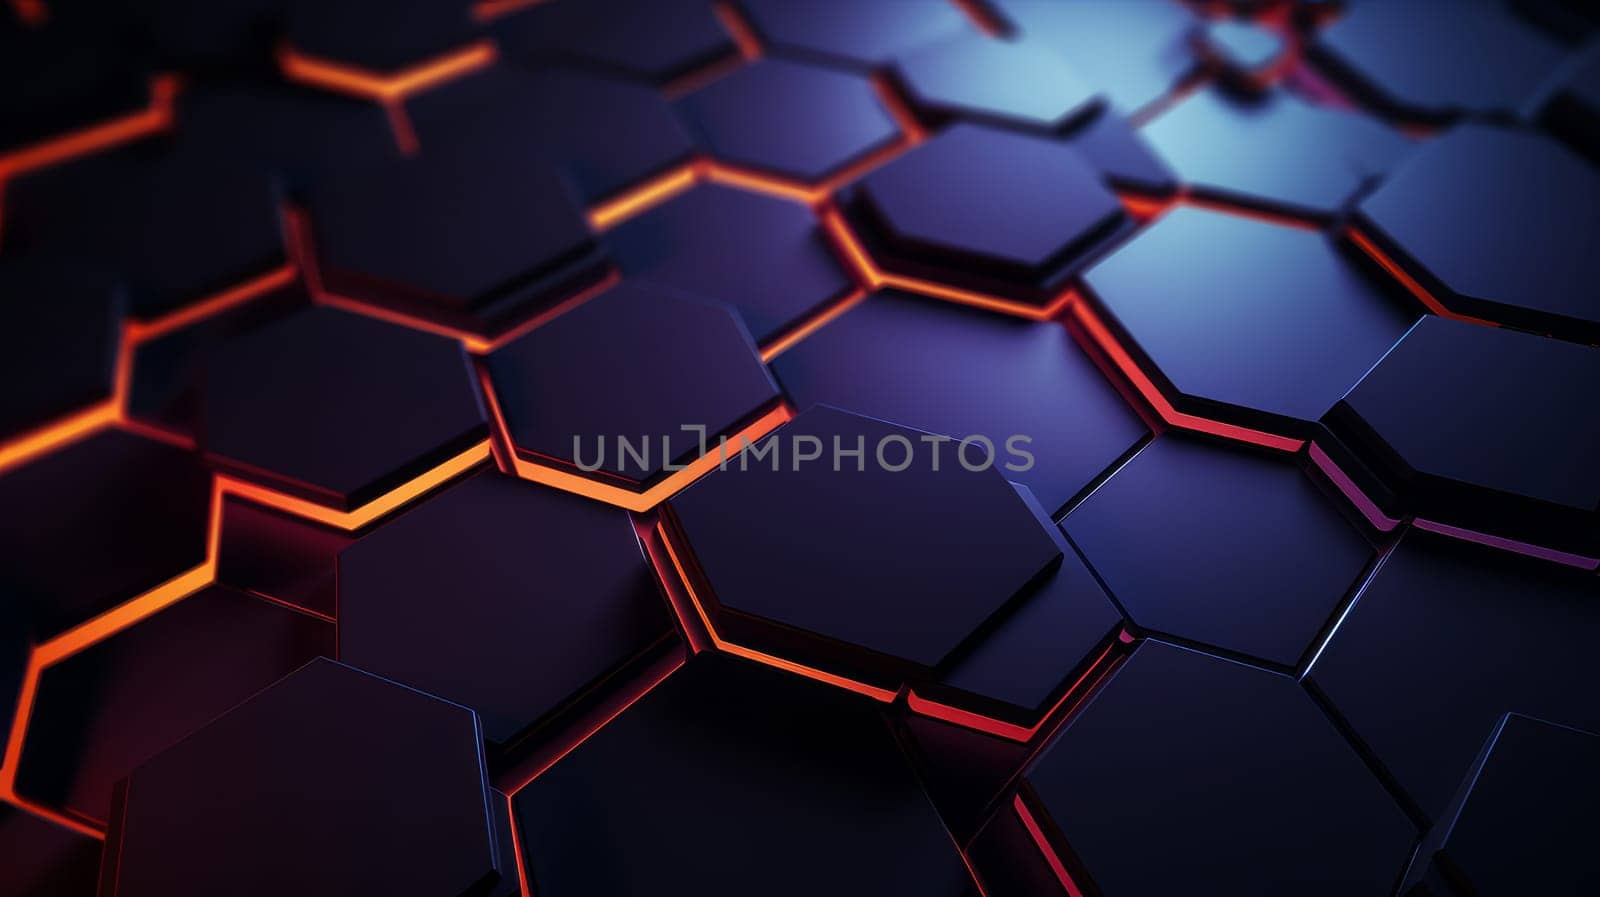 Abstract background with black glowing honeycomb hexagons and fiery orange backlight by Alla_Yurtayeva